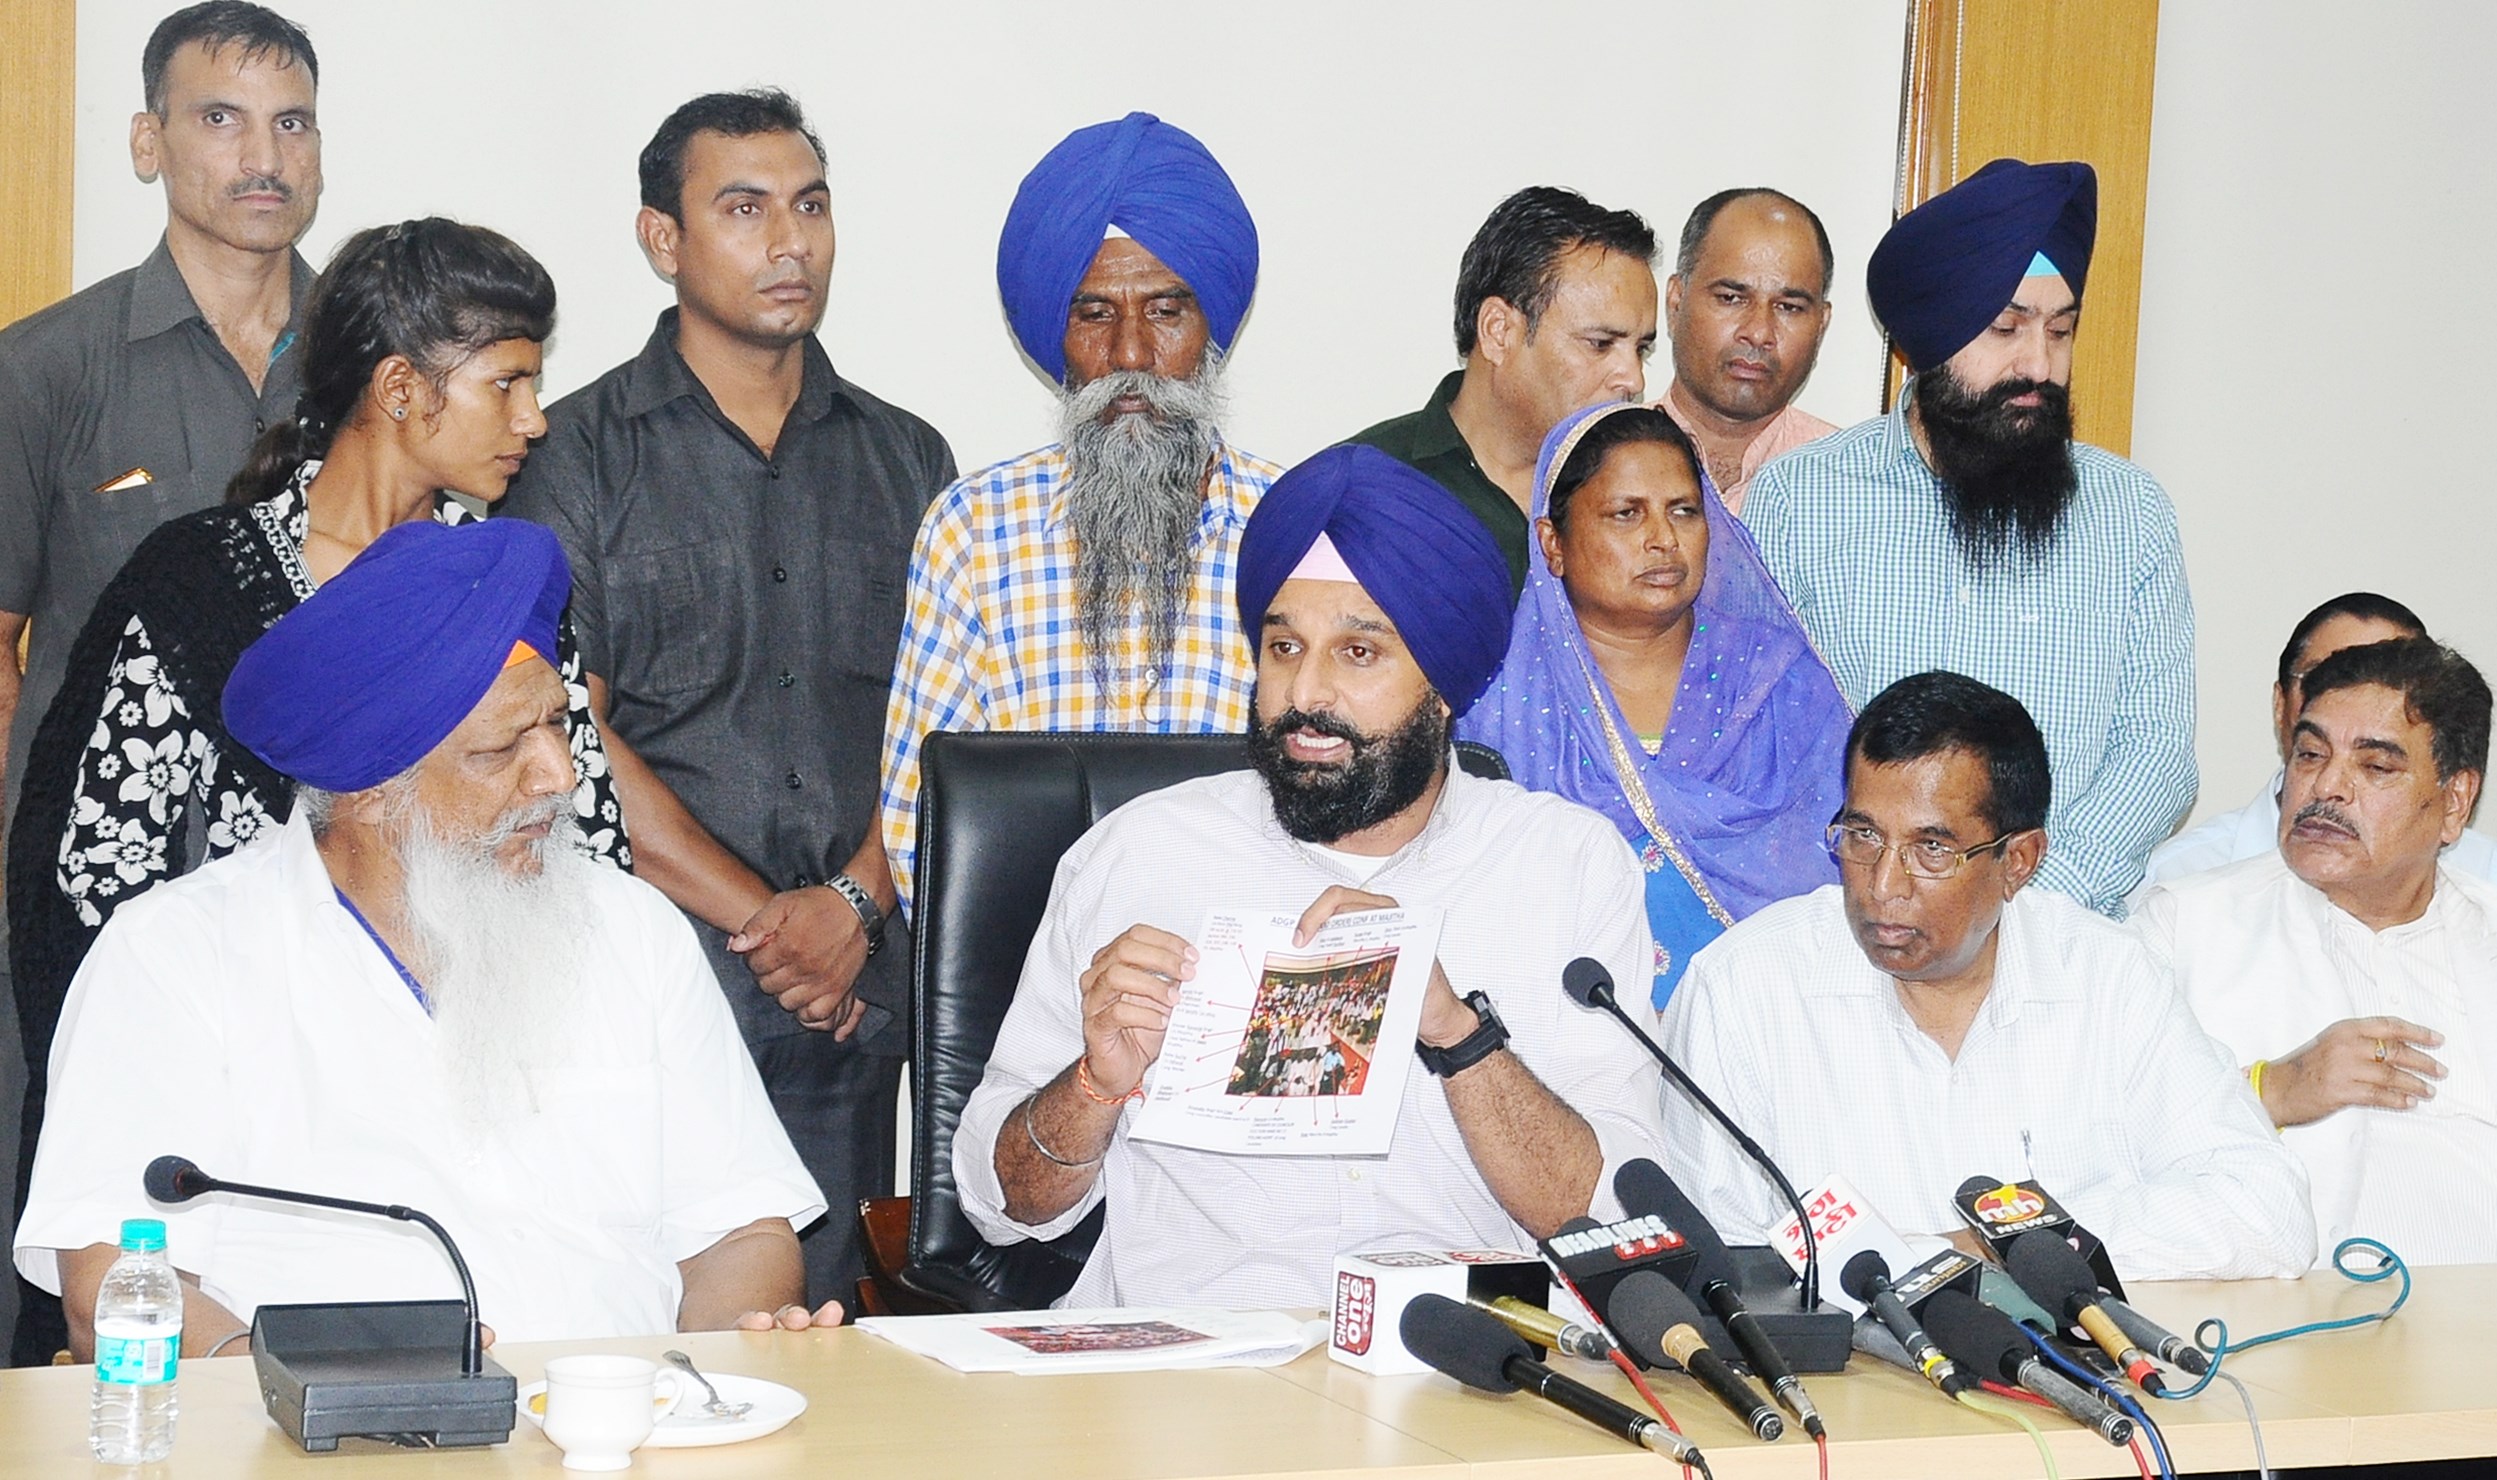 Bagga dalit atrocity victims presented before SC Commission by SAD-BJP delegation